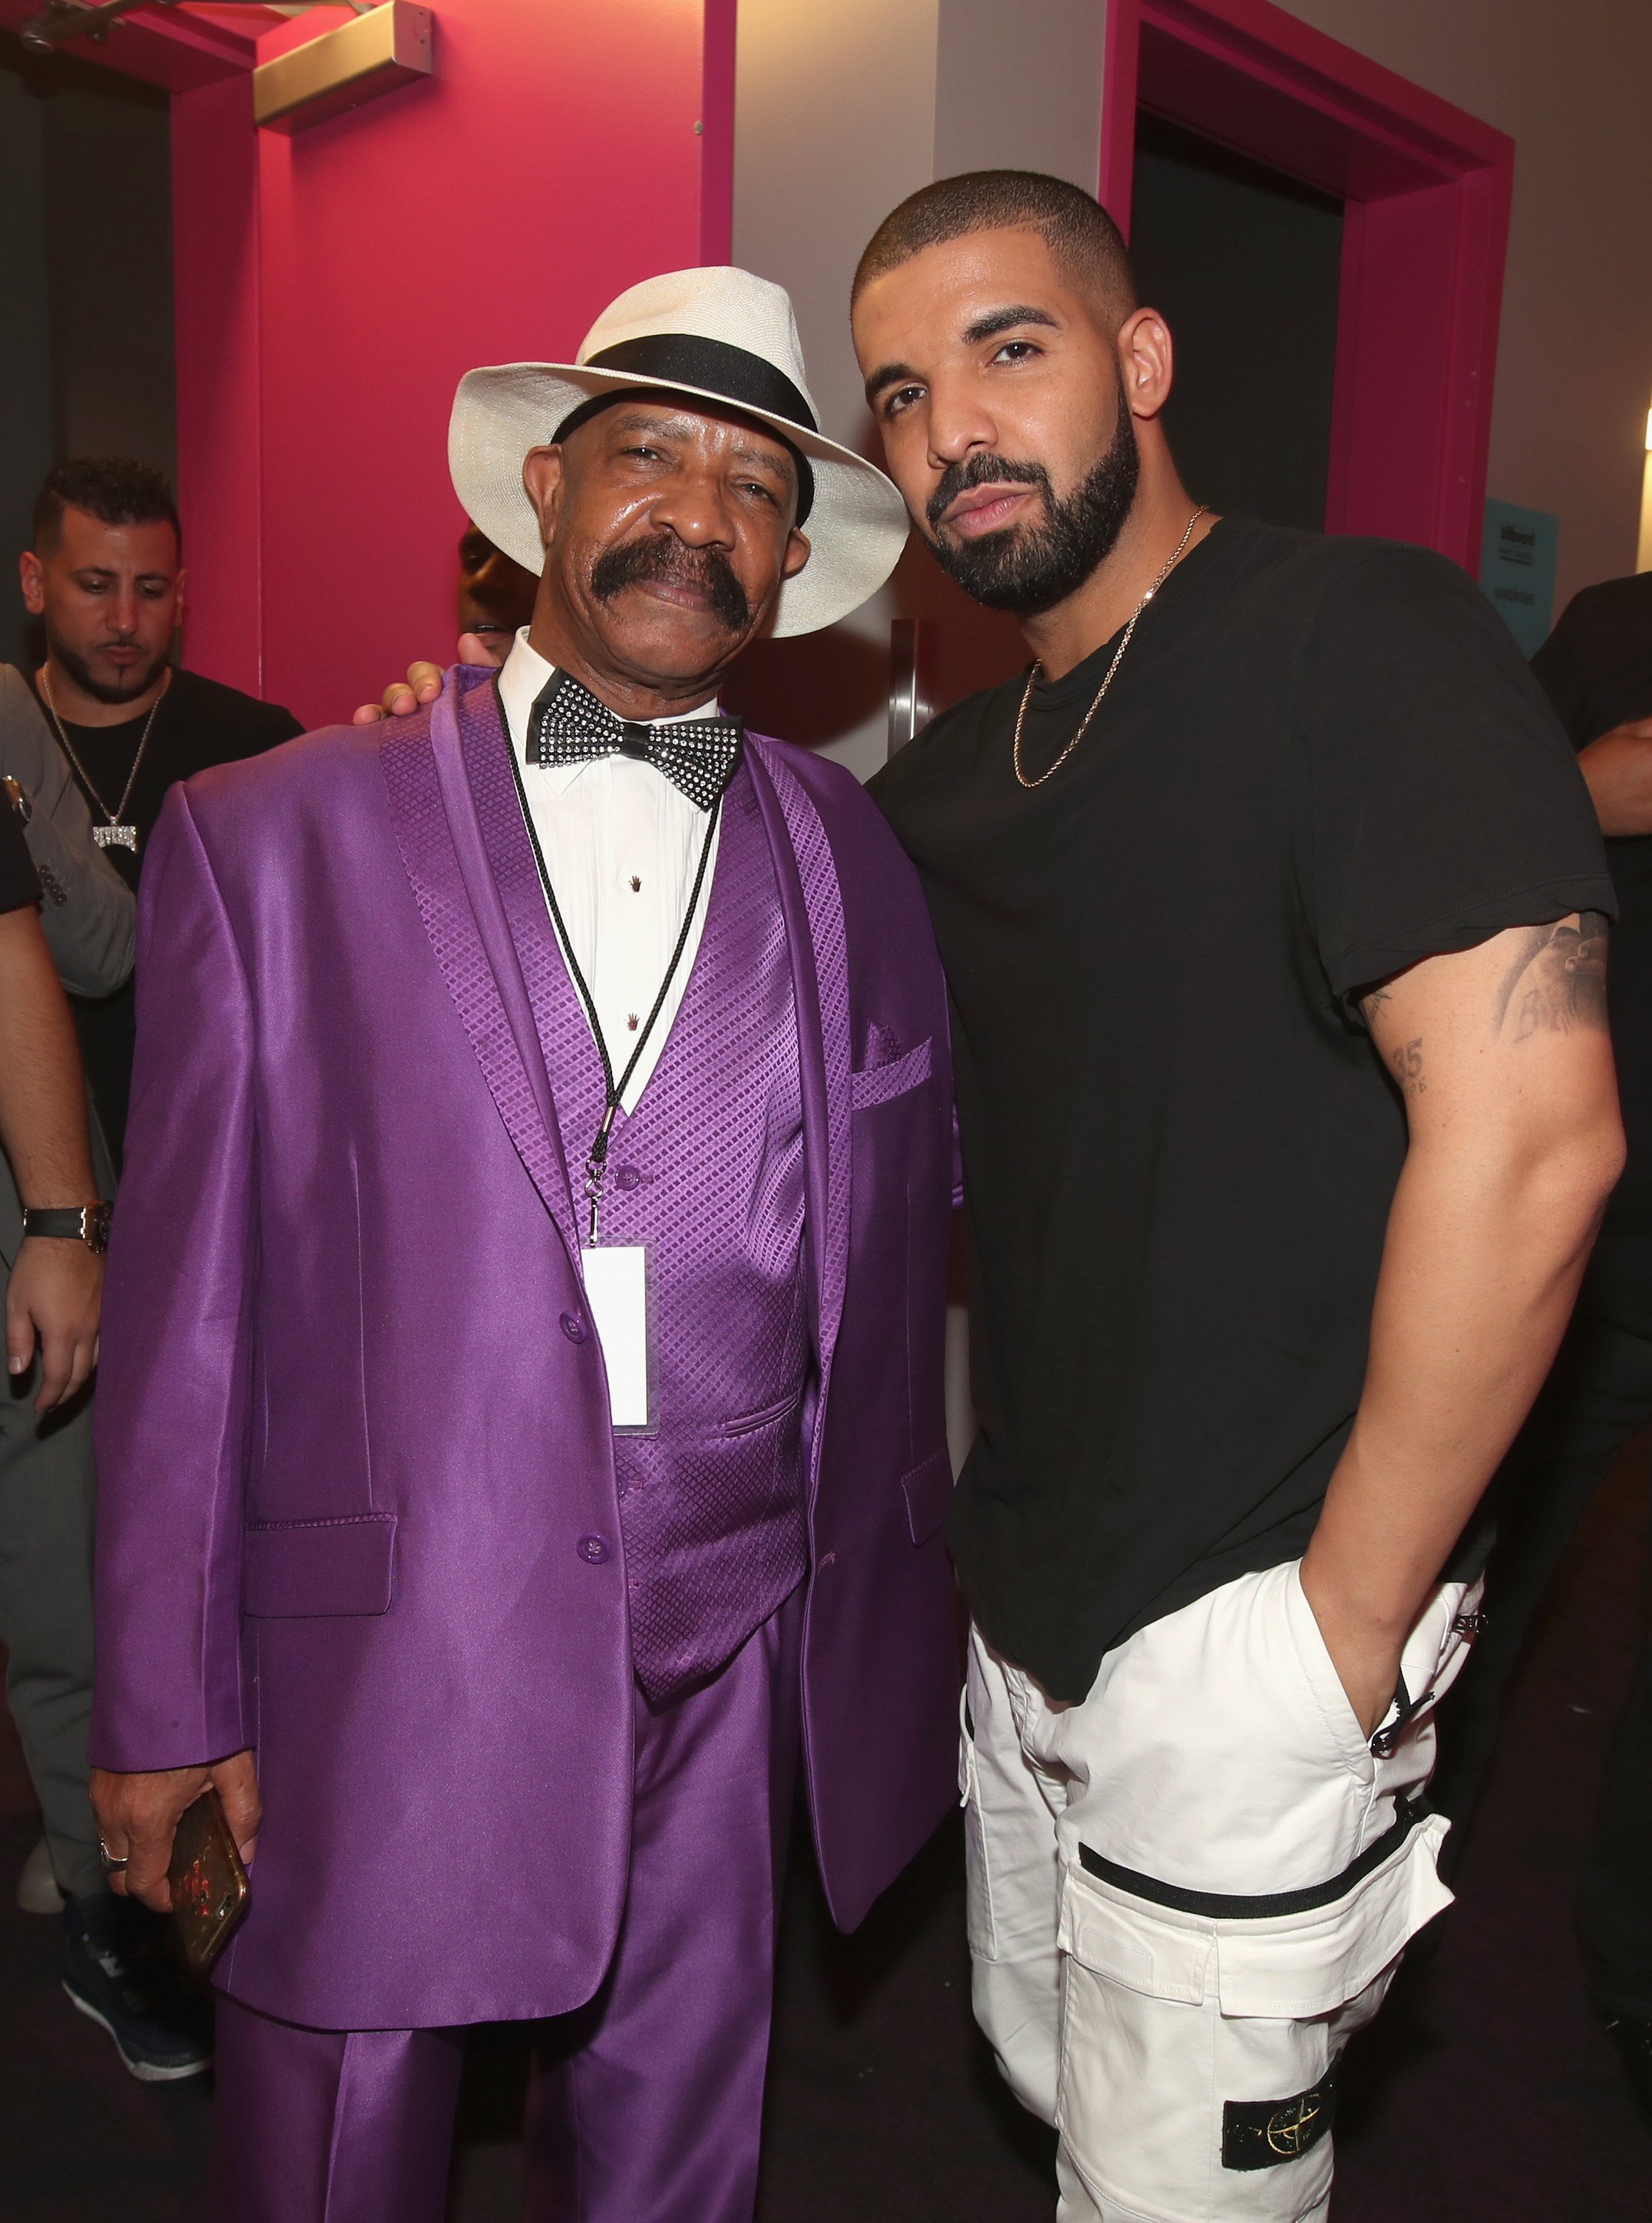 Dennis Graham and Drake attend the 2017 Billboard Music Awards at T-Mobile Arena on May 21, 2017 | Photo: GettyImages